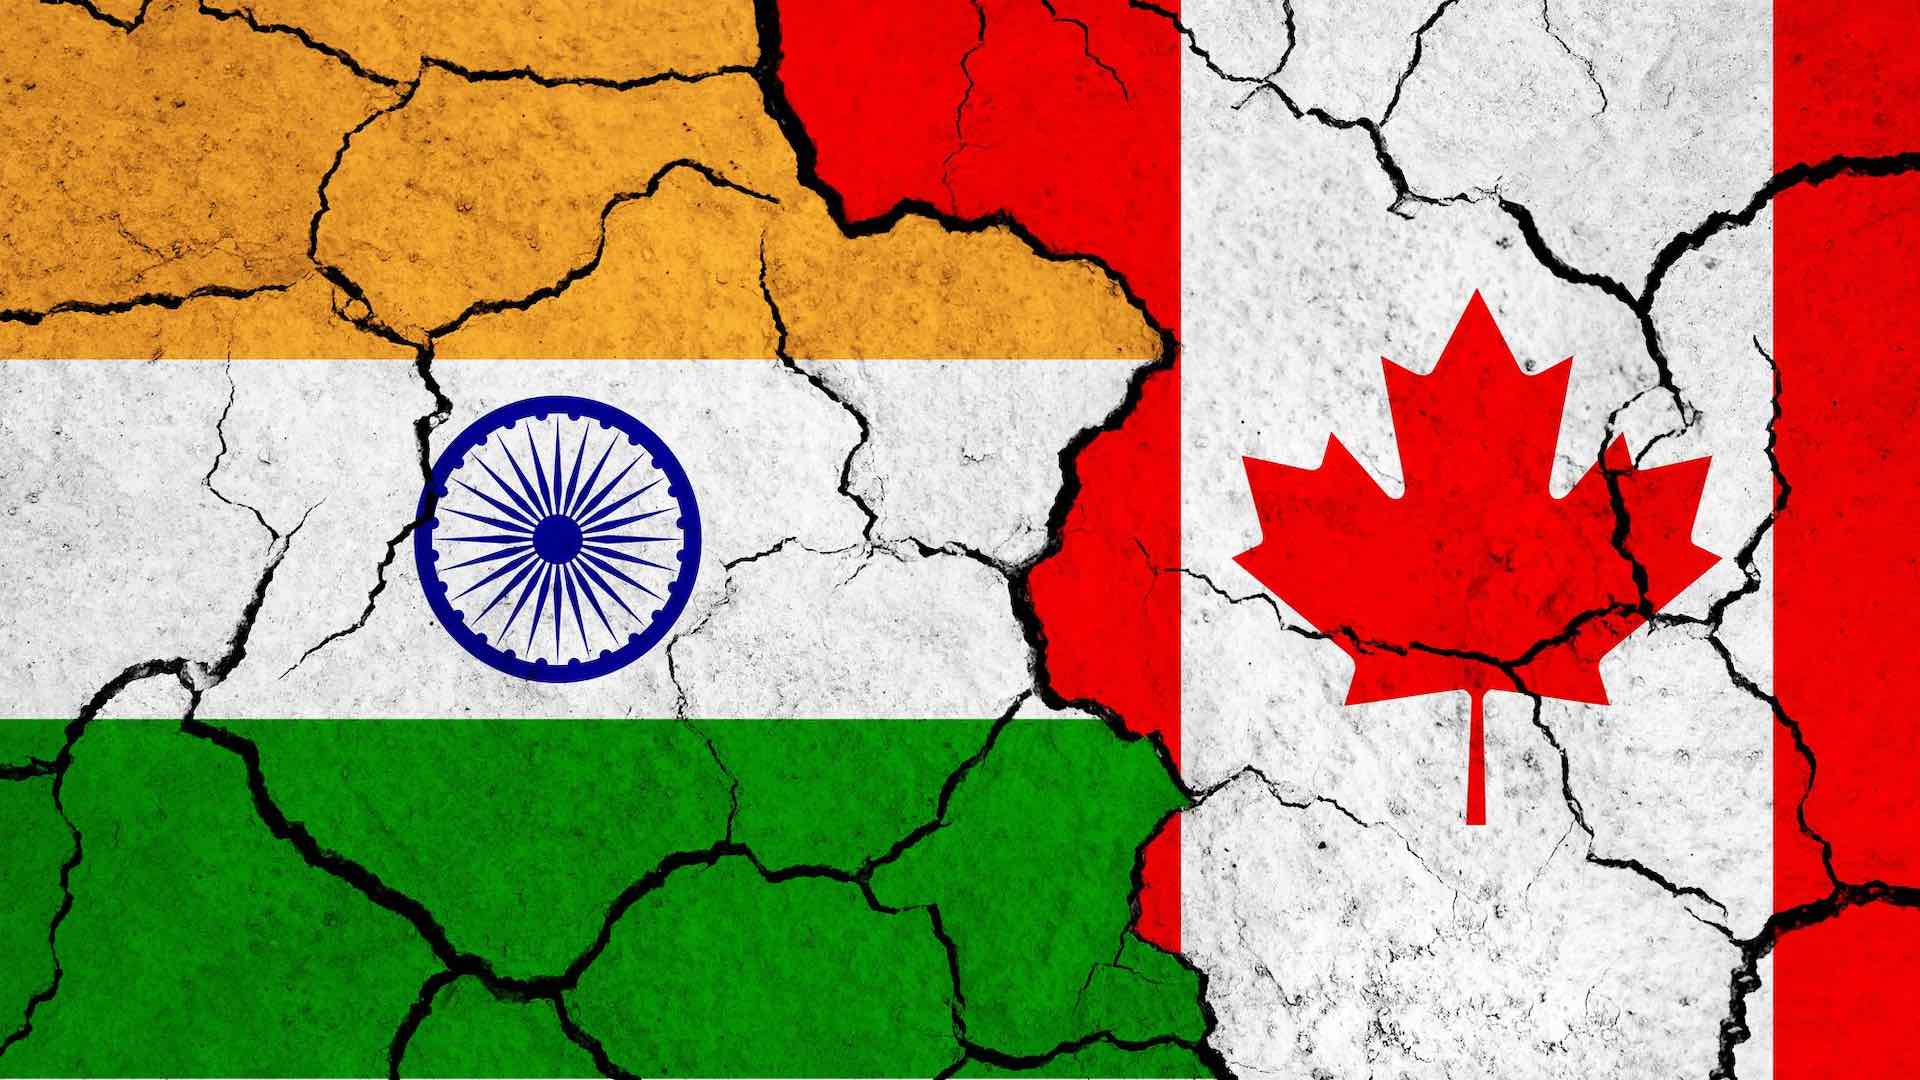 India's expulsion of Canadian diplomat reflects deep-rooted concerns over Khalistan extremism